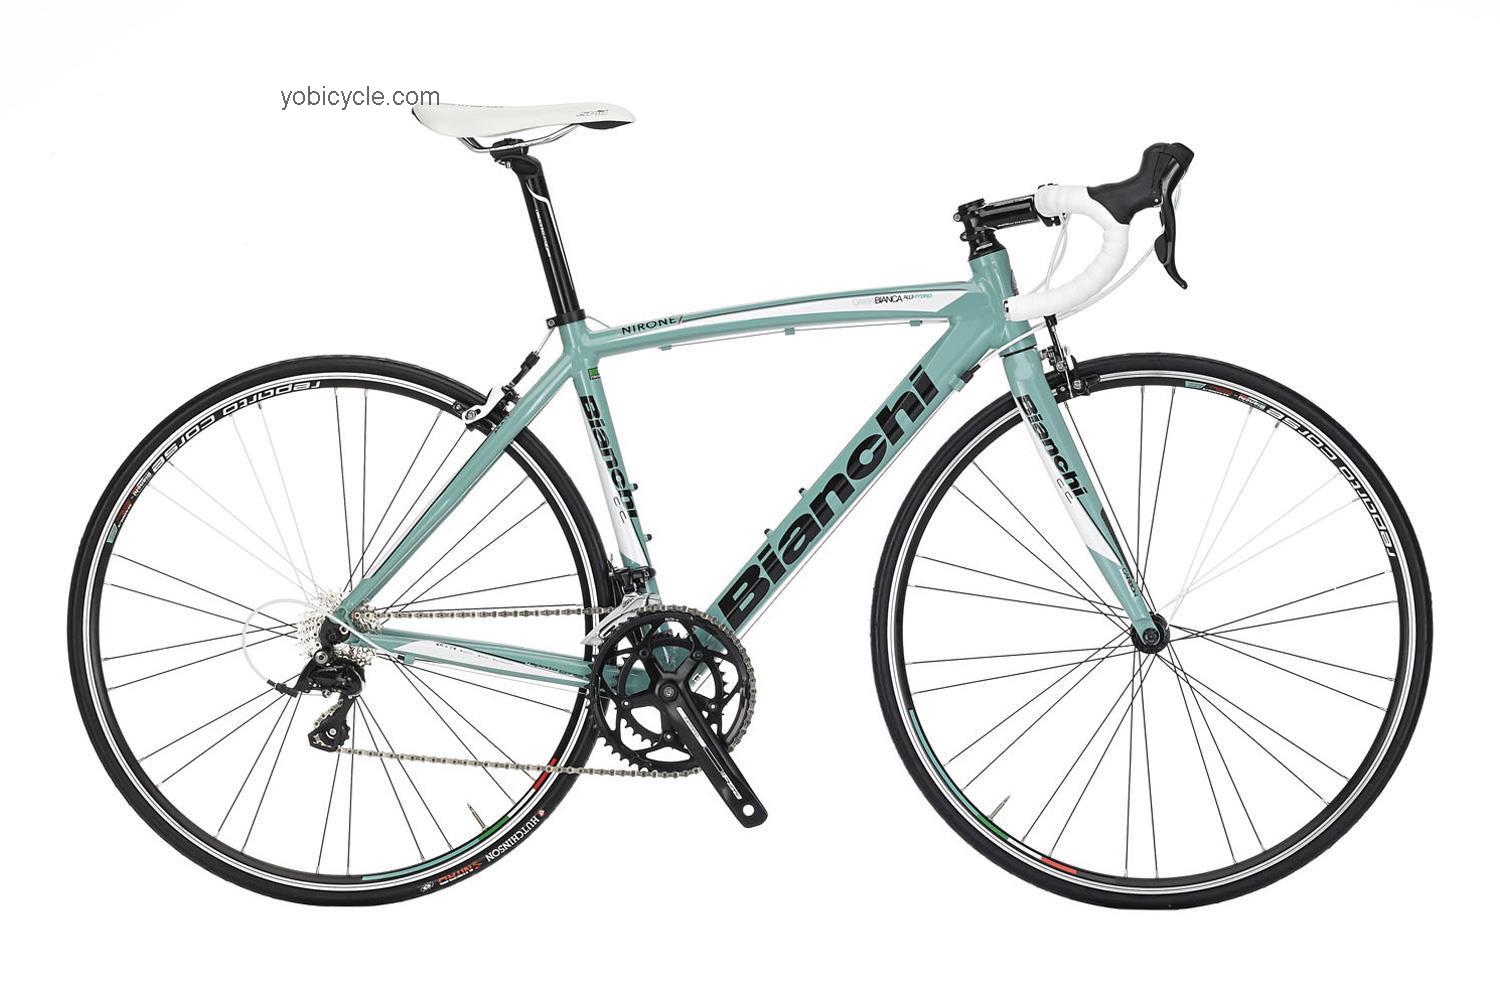 Bianchi Via Nirone Dama Sora competitors and comparison tool online specs and performance